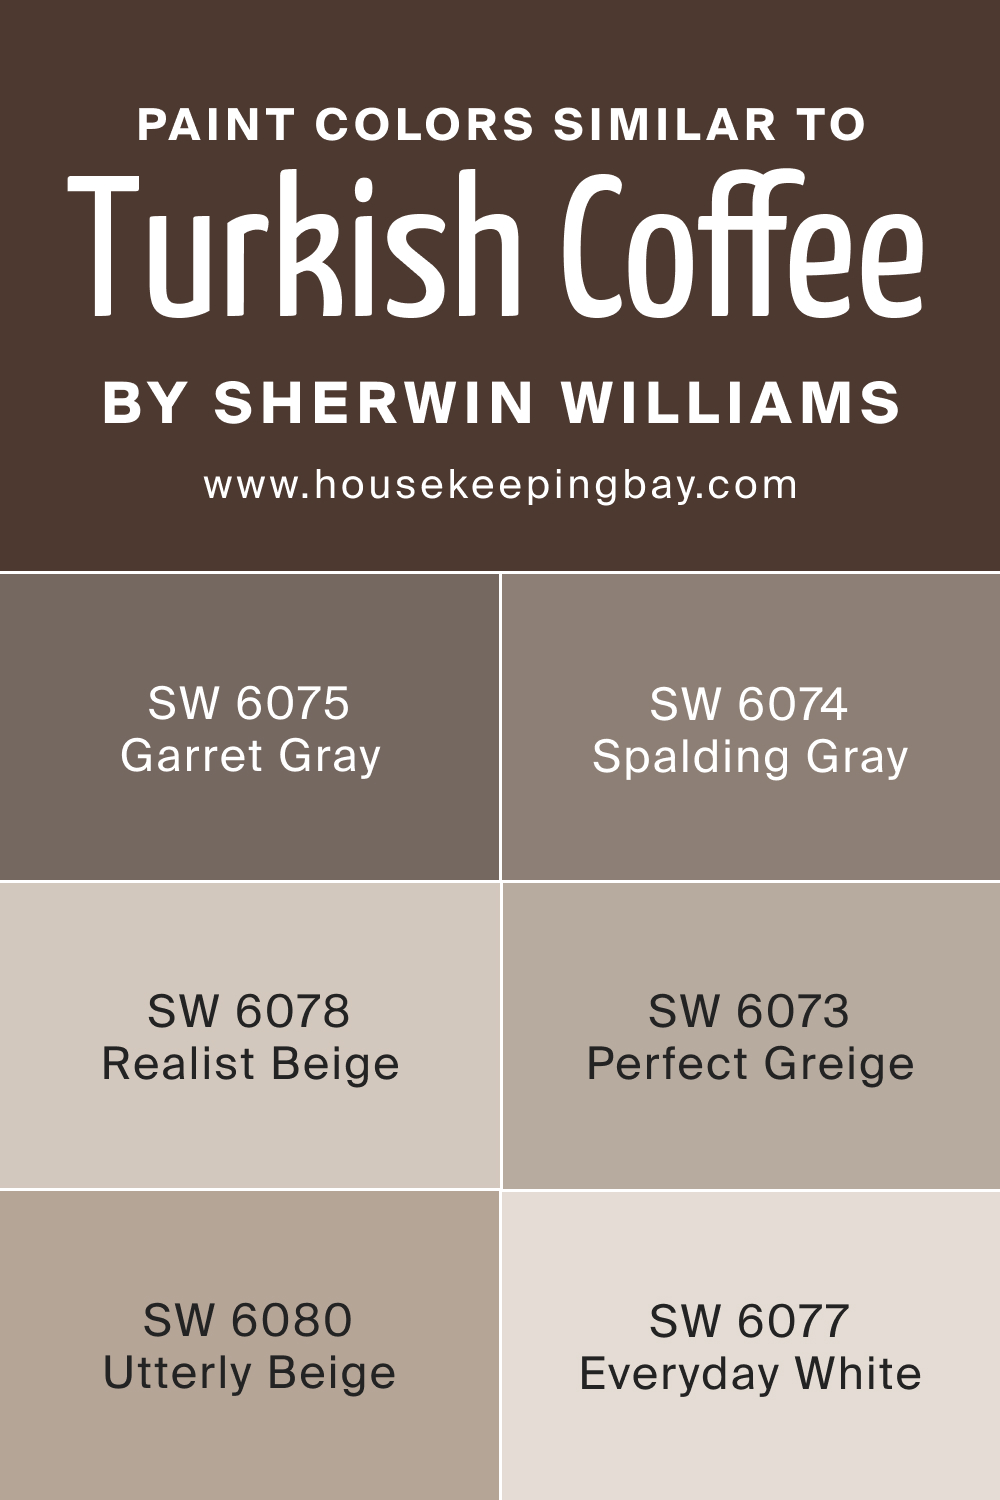 Colors Similar to SW 6076 Turkish Coffee